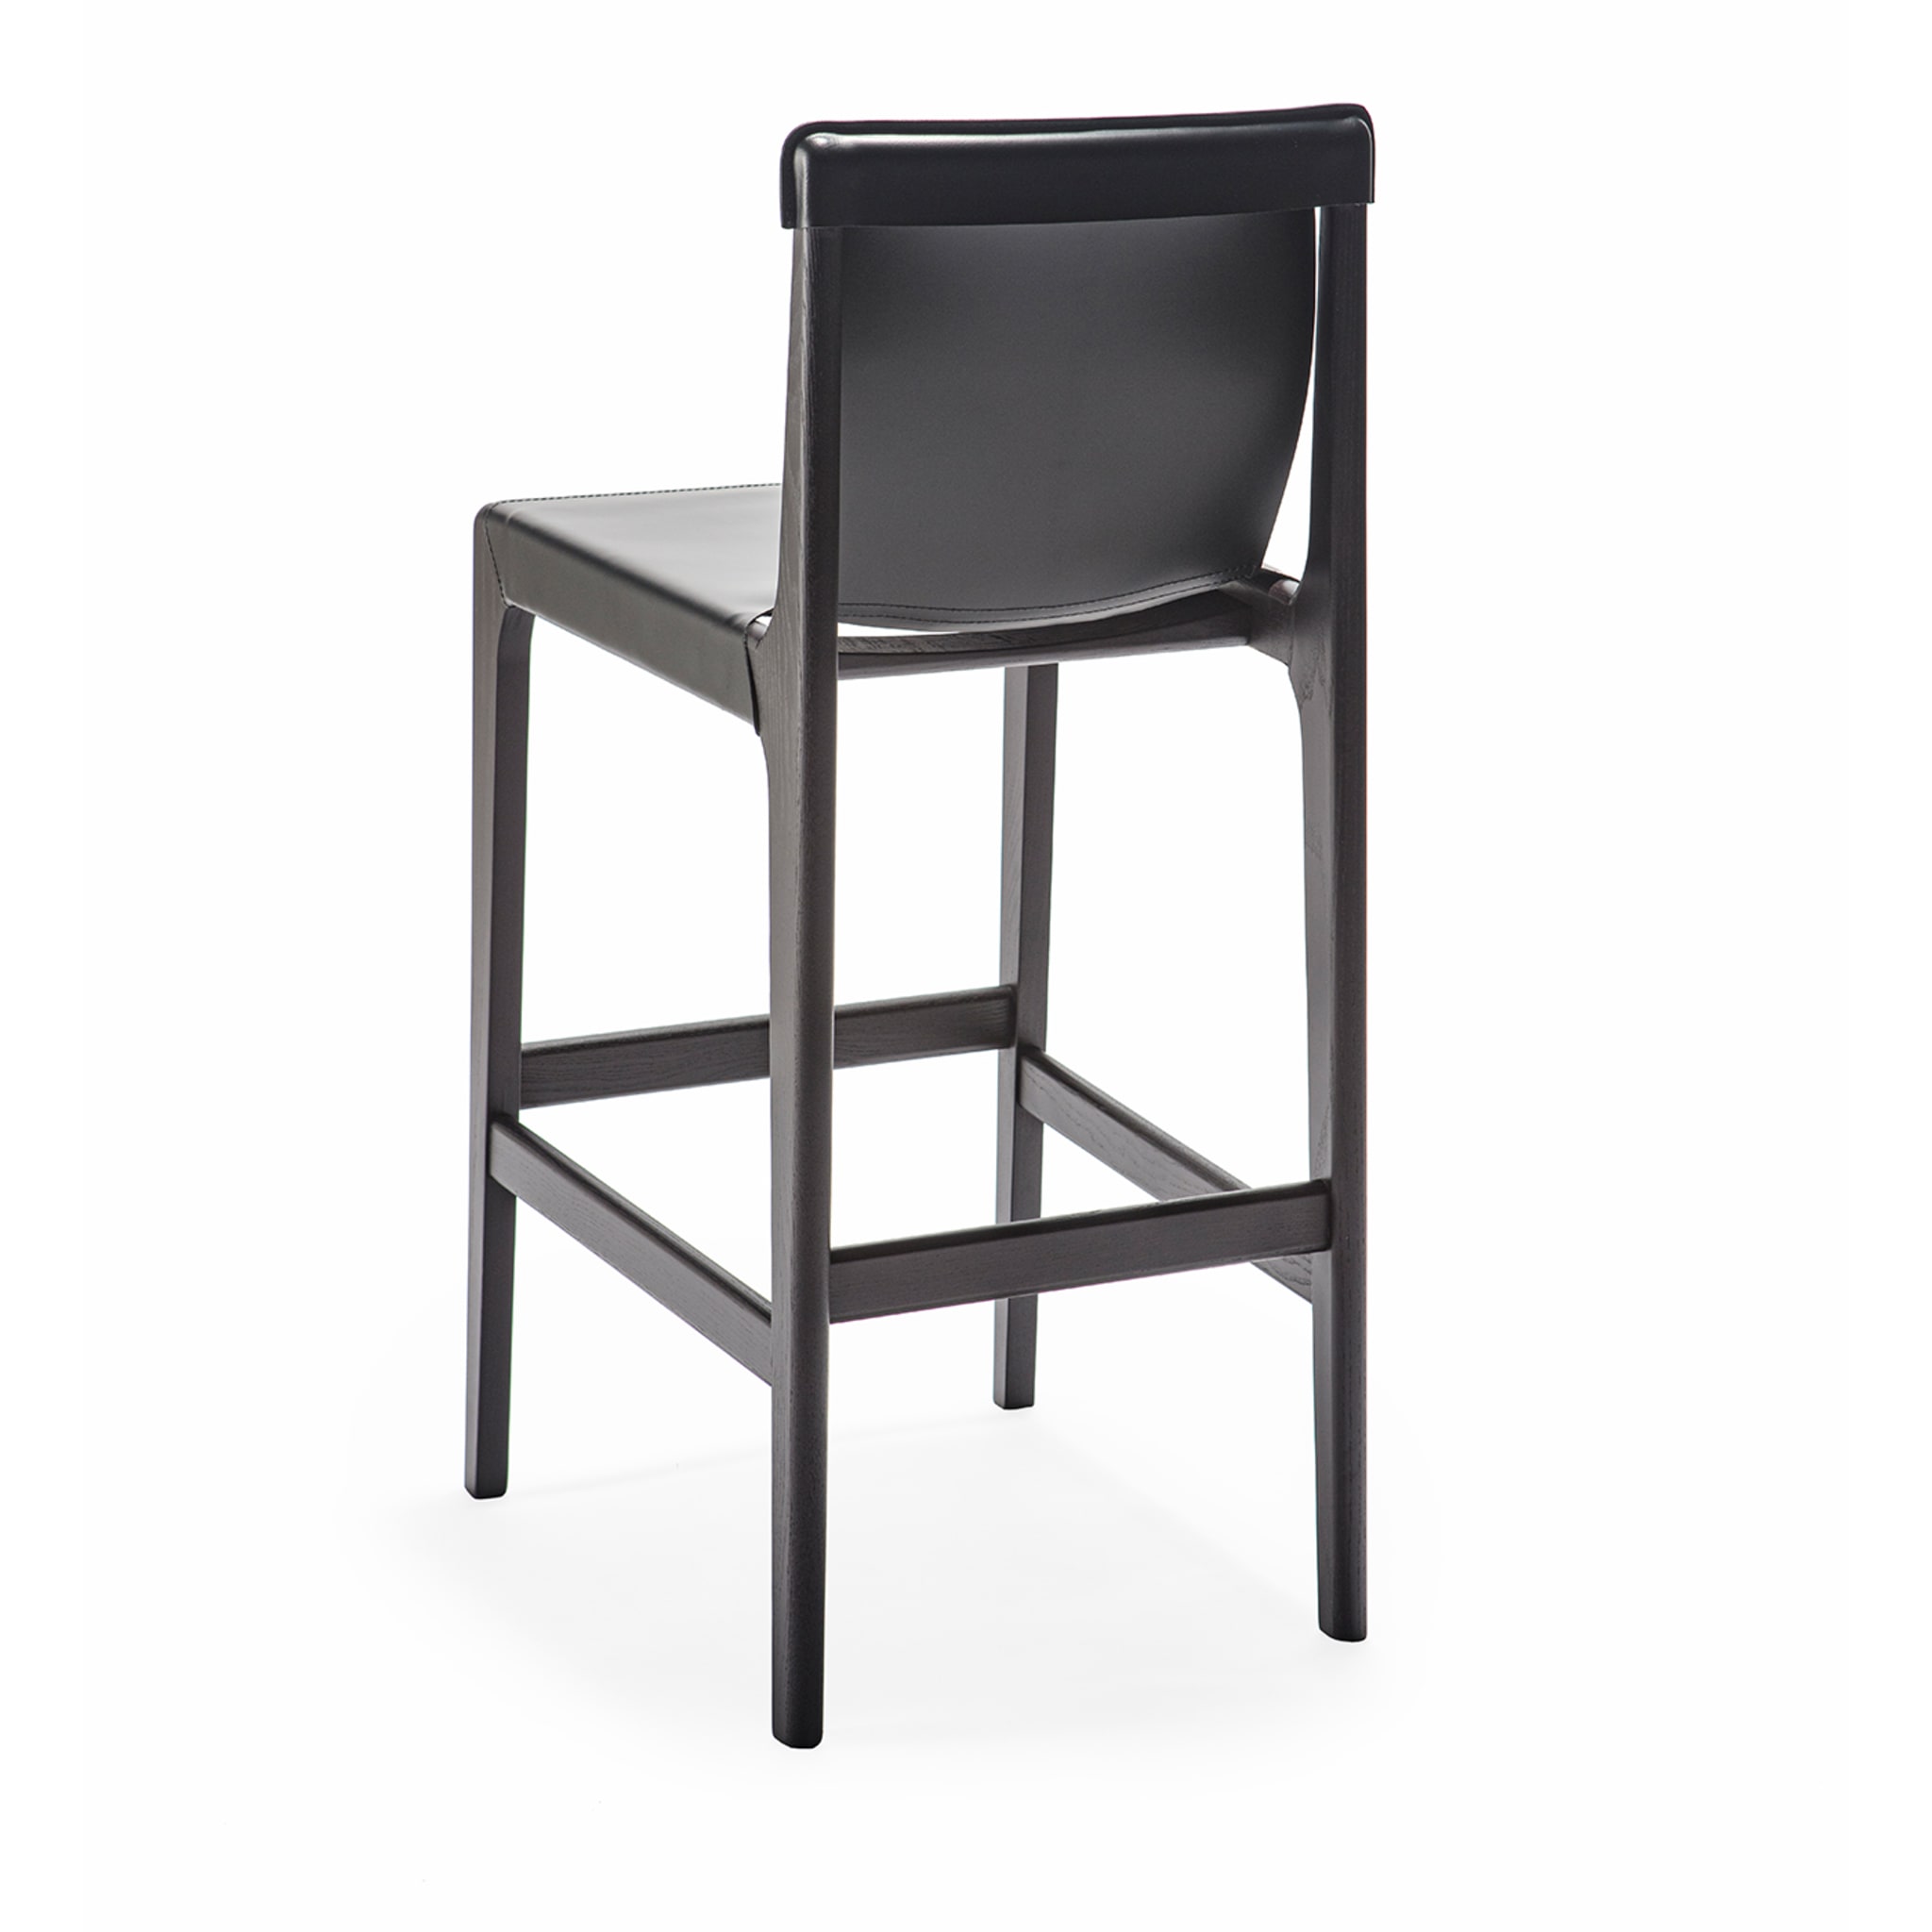 Burano/sg 30 Black Leather Counter Stool by Balutto Associati - Alternative view 1